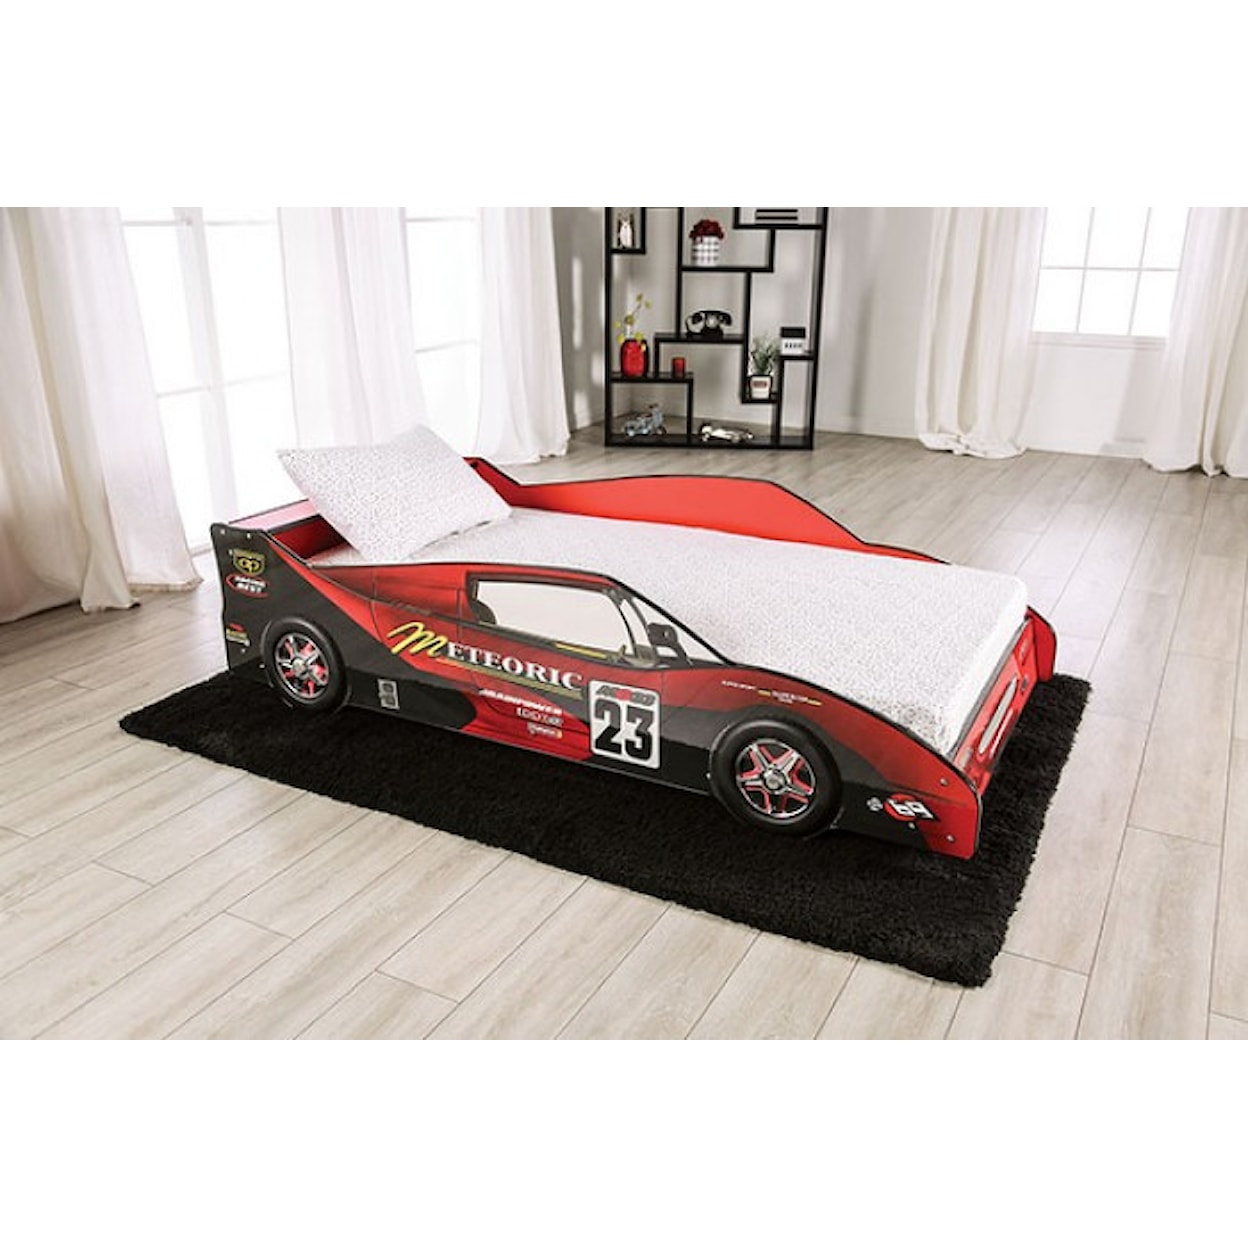 Furniture of America Dustrack RED RACE CAR TWIN BED |